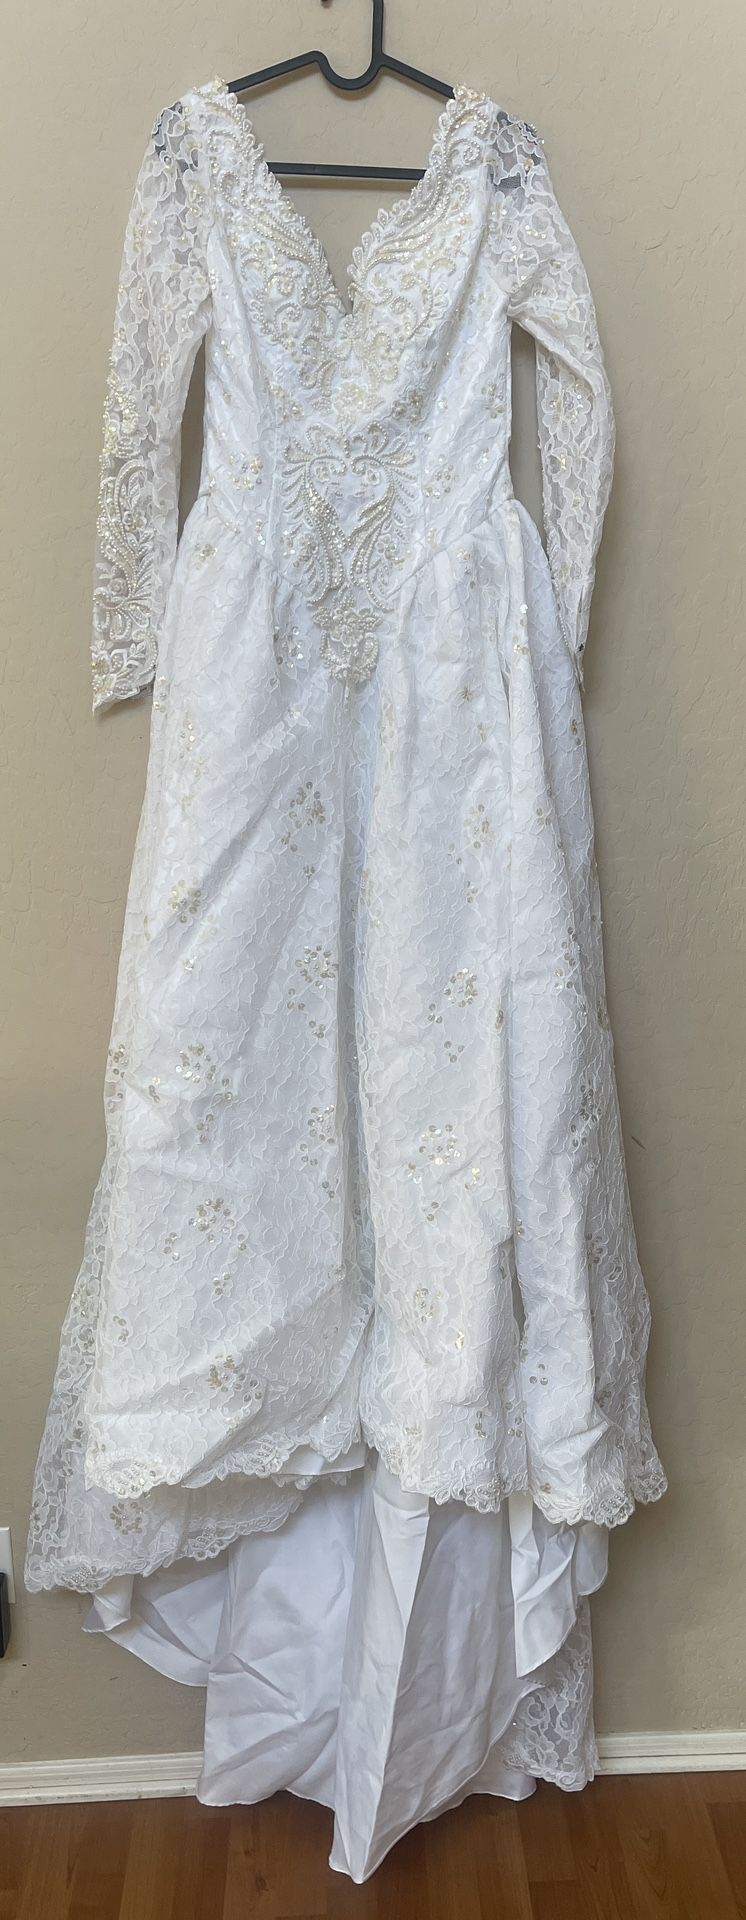 VINTAGE Pallas Athena white Pearl Sleeved Lace Wedding Dress Size 4-6 NEED GONE